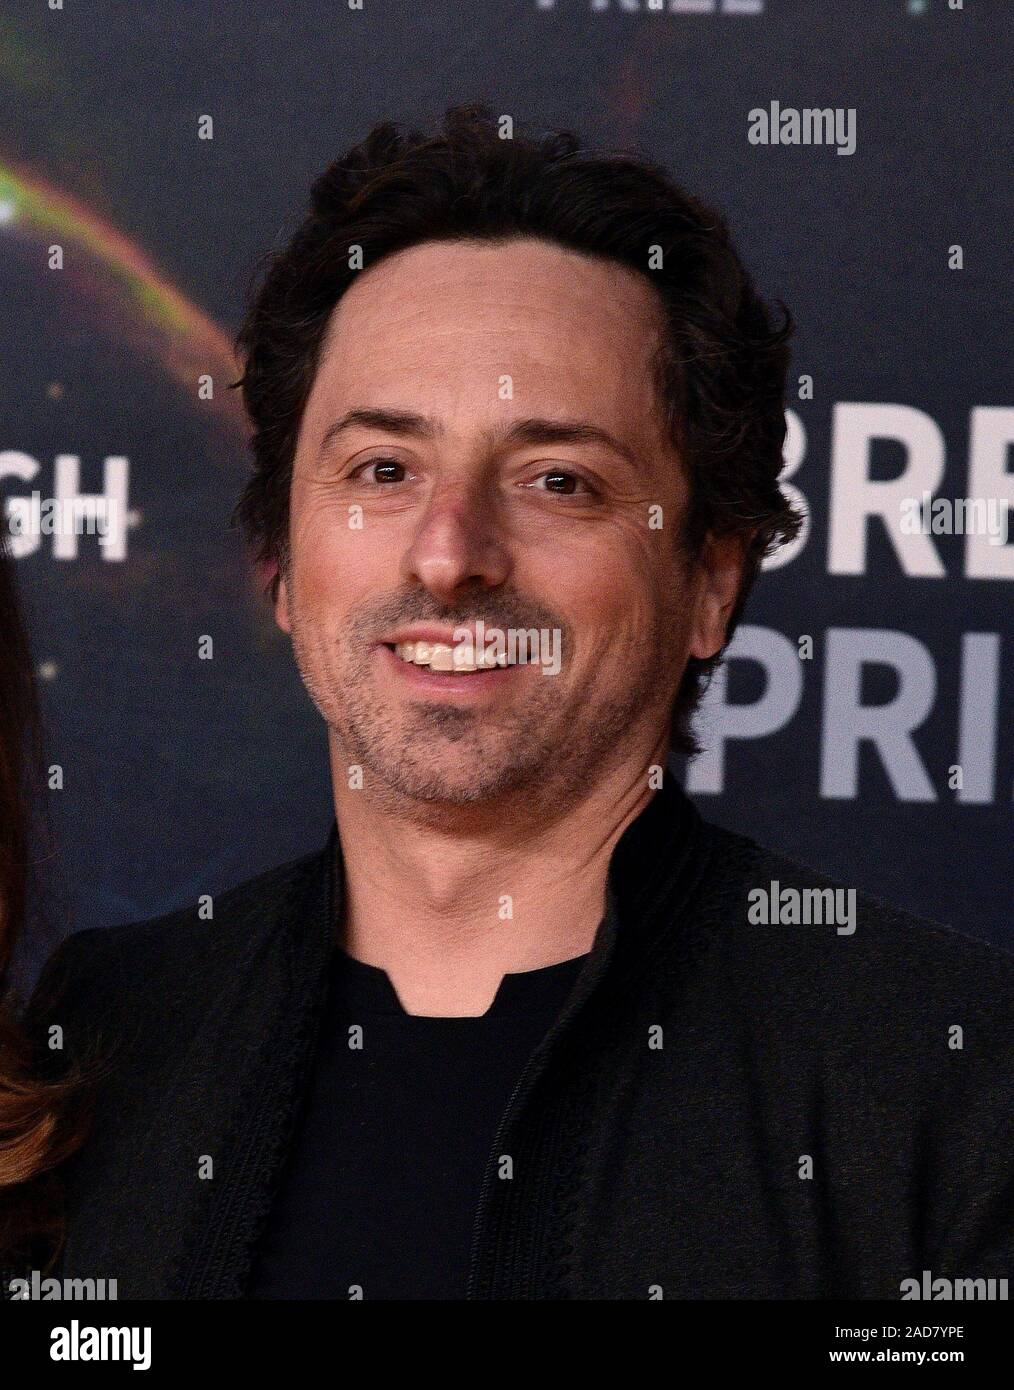 ***FILE PHOTOS*** Larry Page and Sergey Brin step down as heads of Google. MOUNTAIN VIEW, CALIFORNIA - NOVEMBER 03: Sergey Brin attends the 2020 Breakthrough Prize Ceremony at NASA Ames Research Center on November 03, 2019 in Mountain View, California. Photo: imageSPACE/MediaPunch Stock Photo